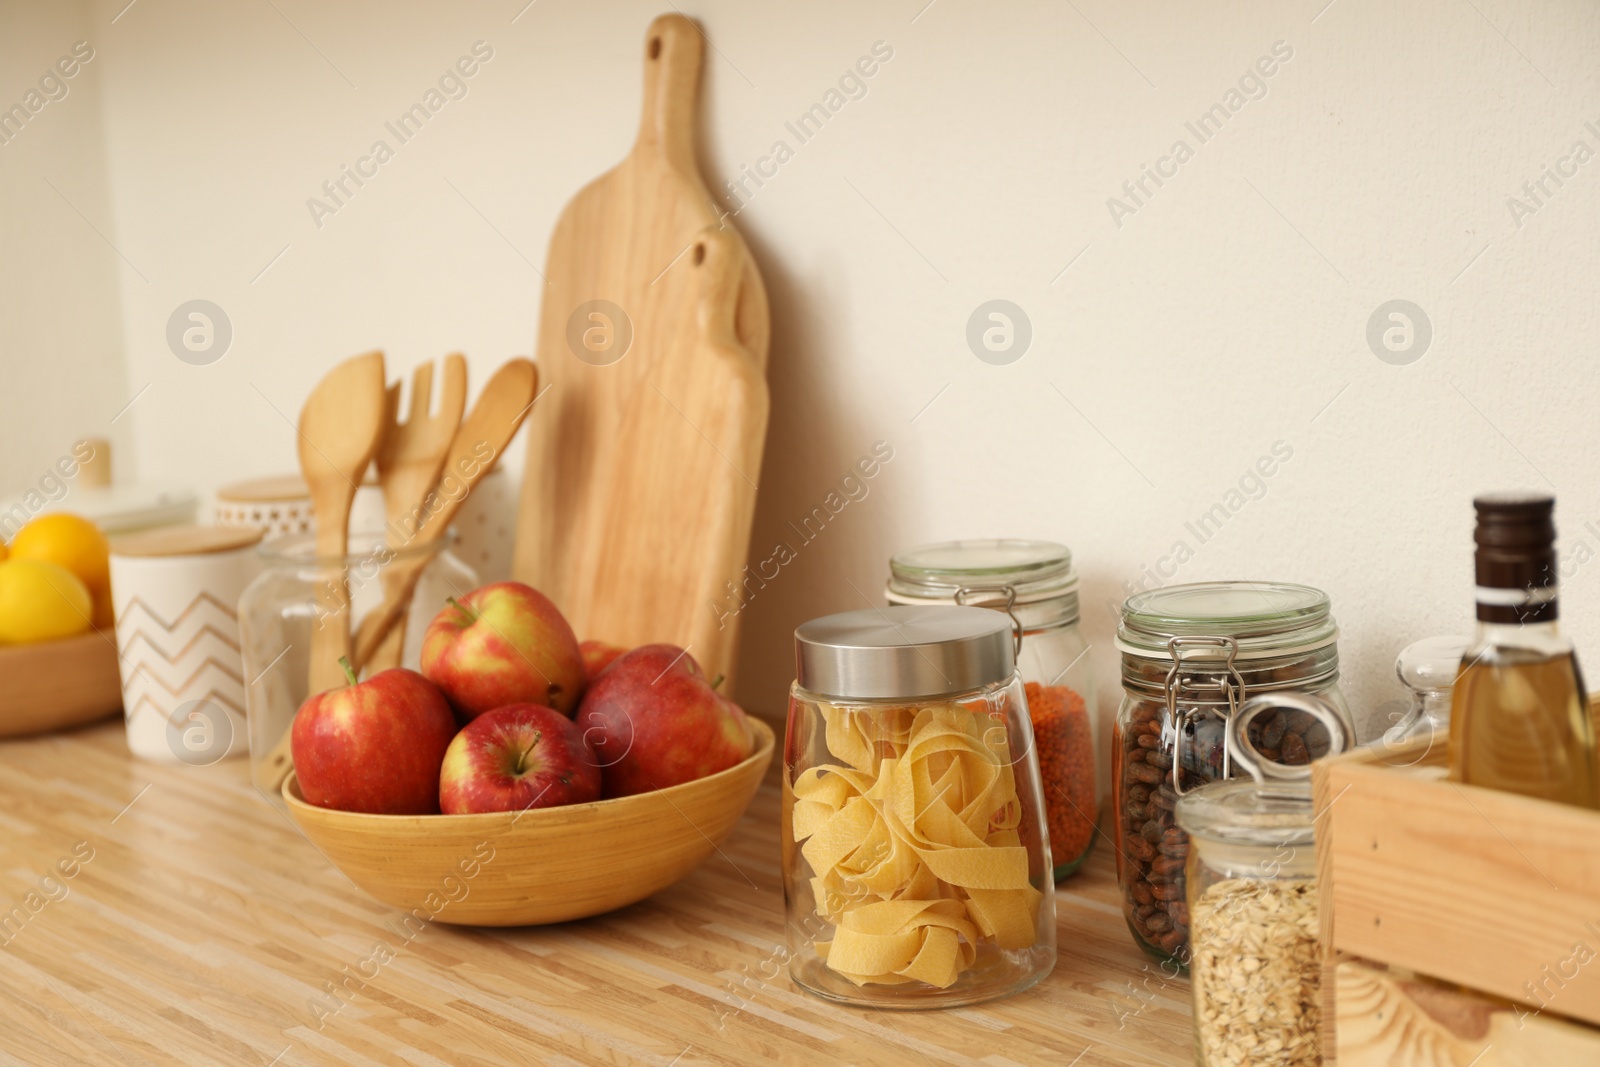 Photo of Different products on wooden countertop in kitchen